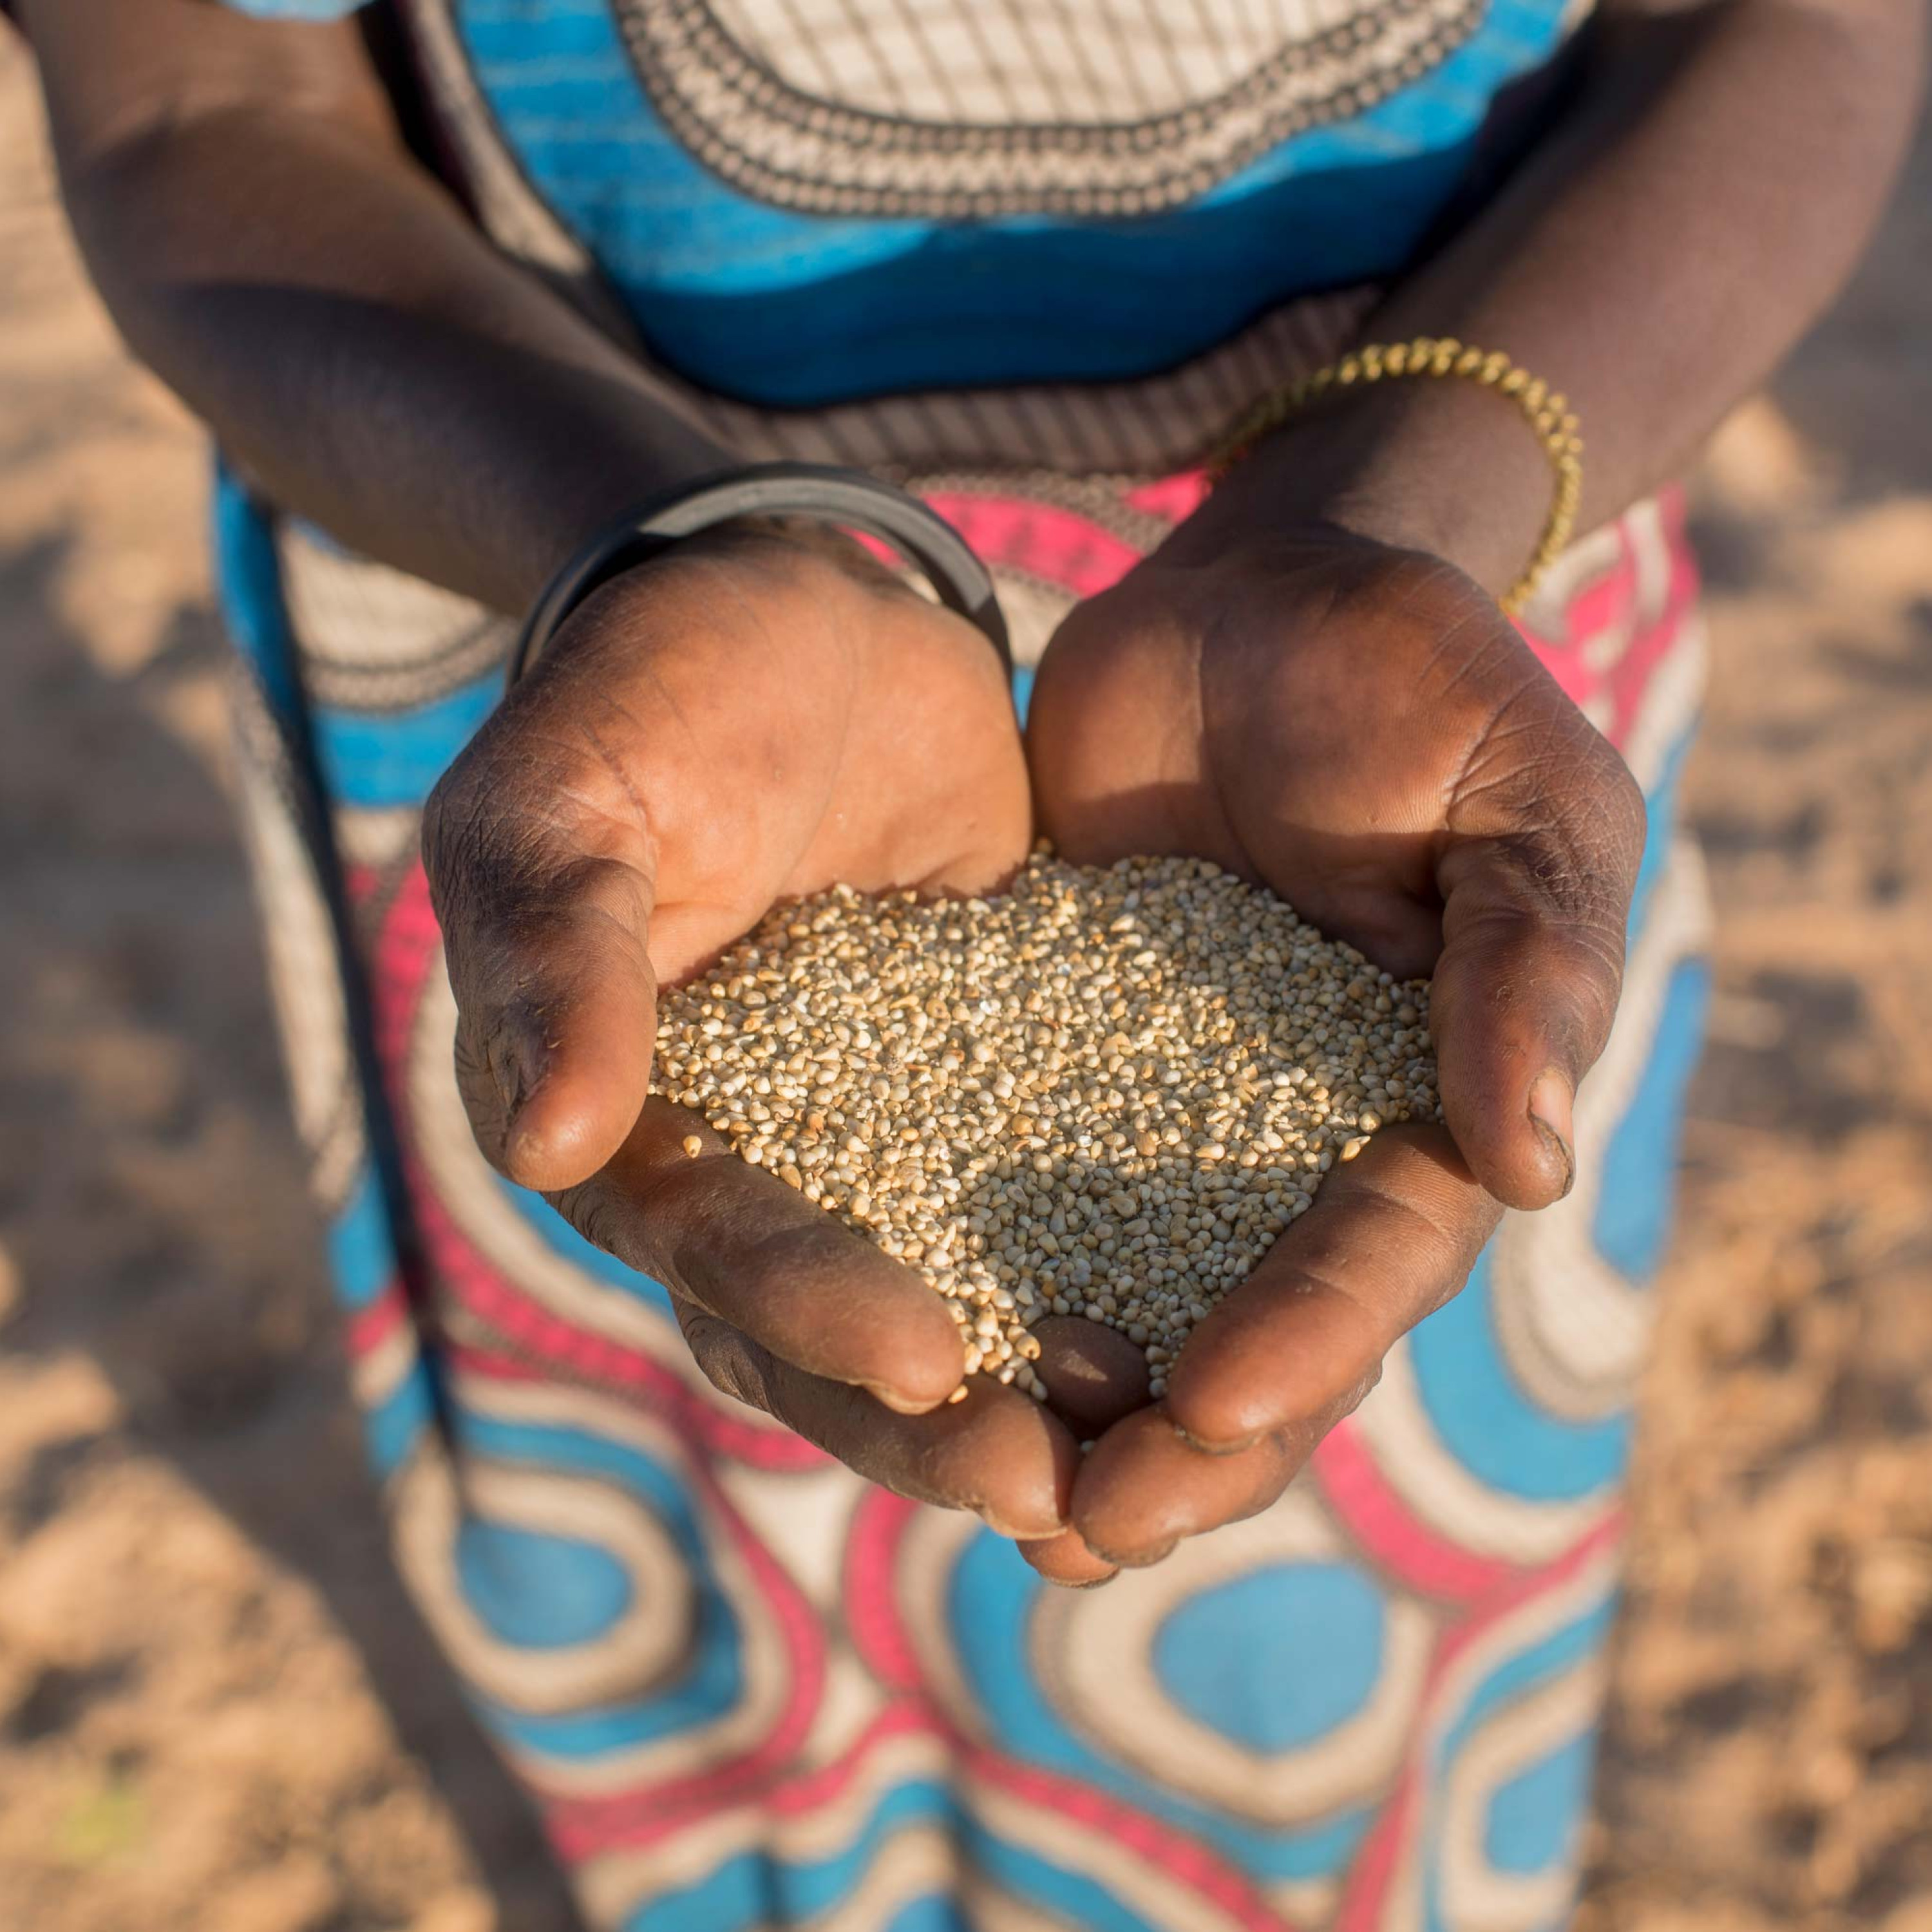 A woman holds grains.